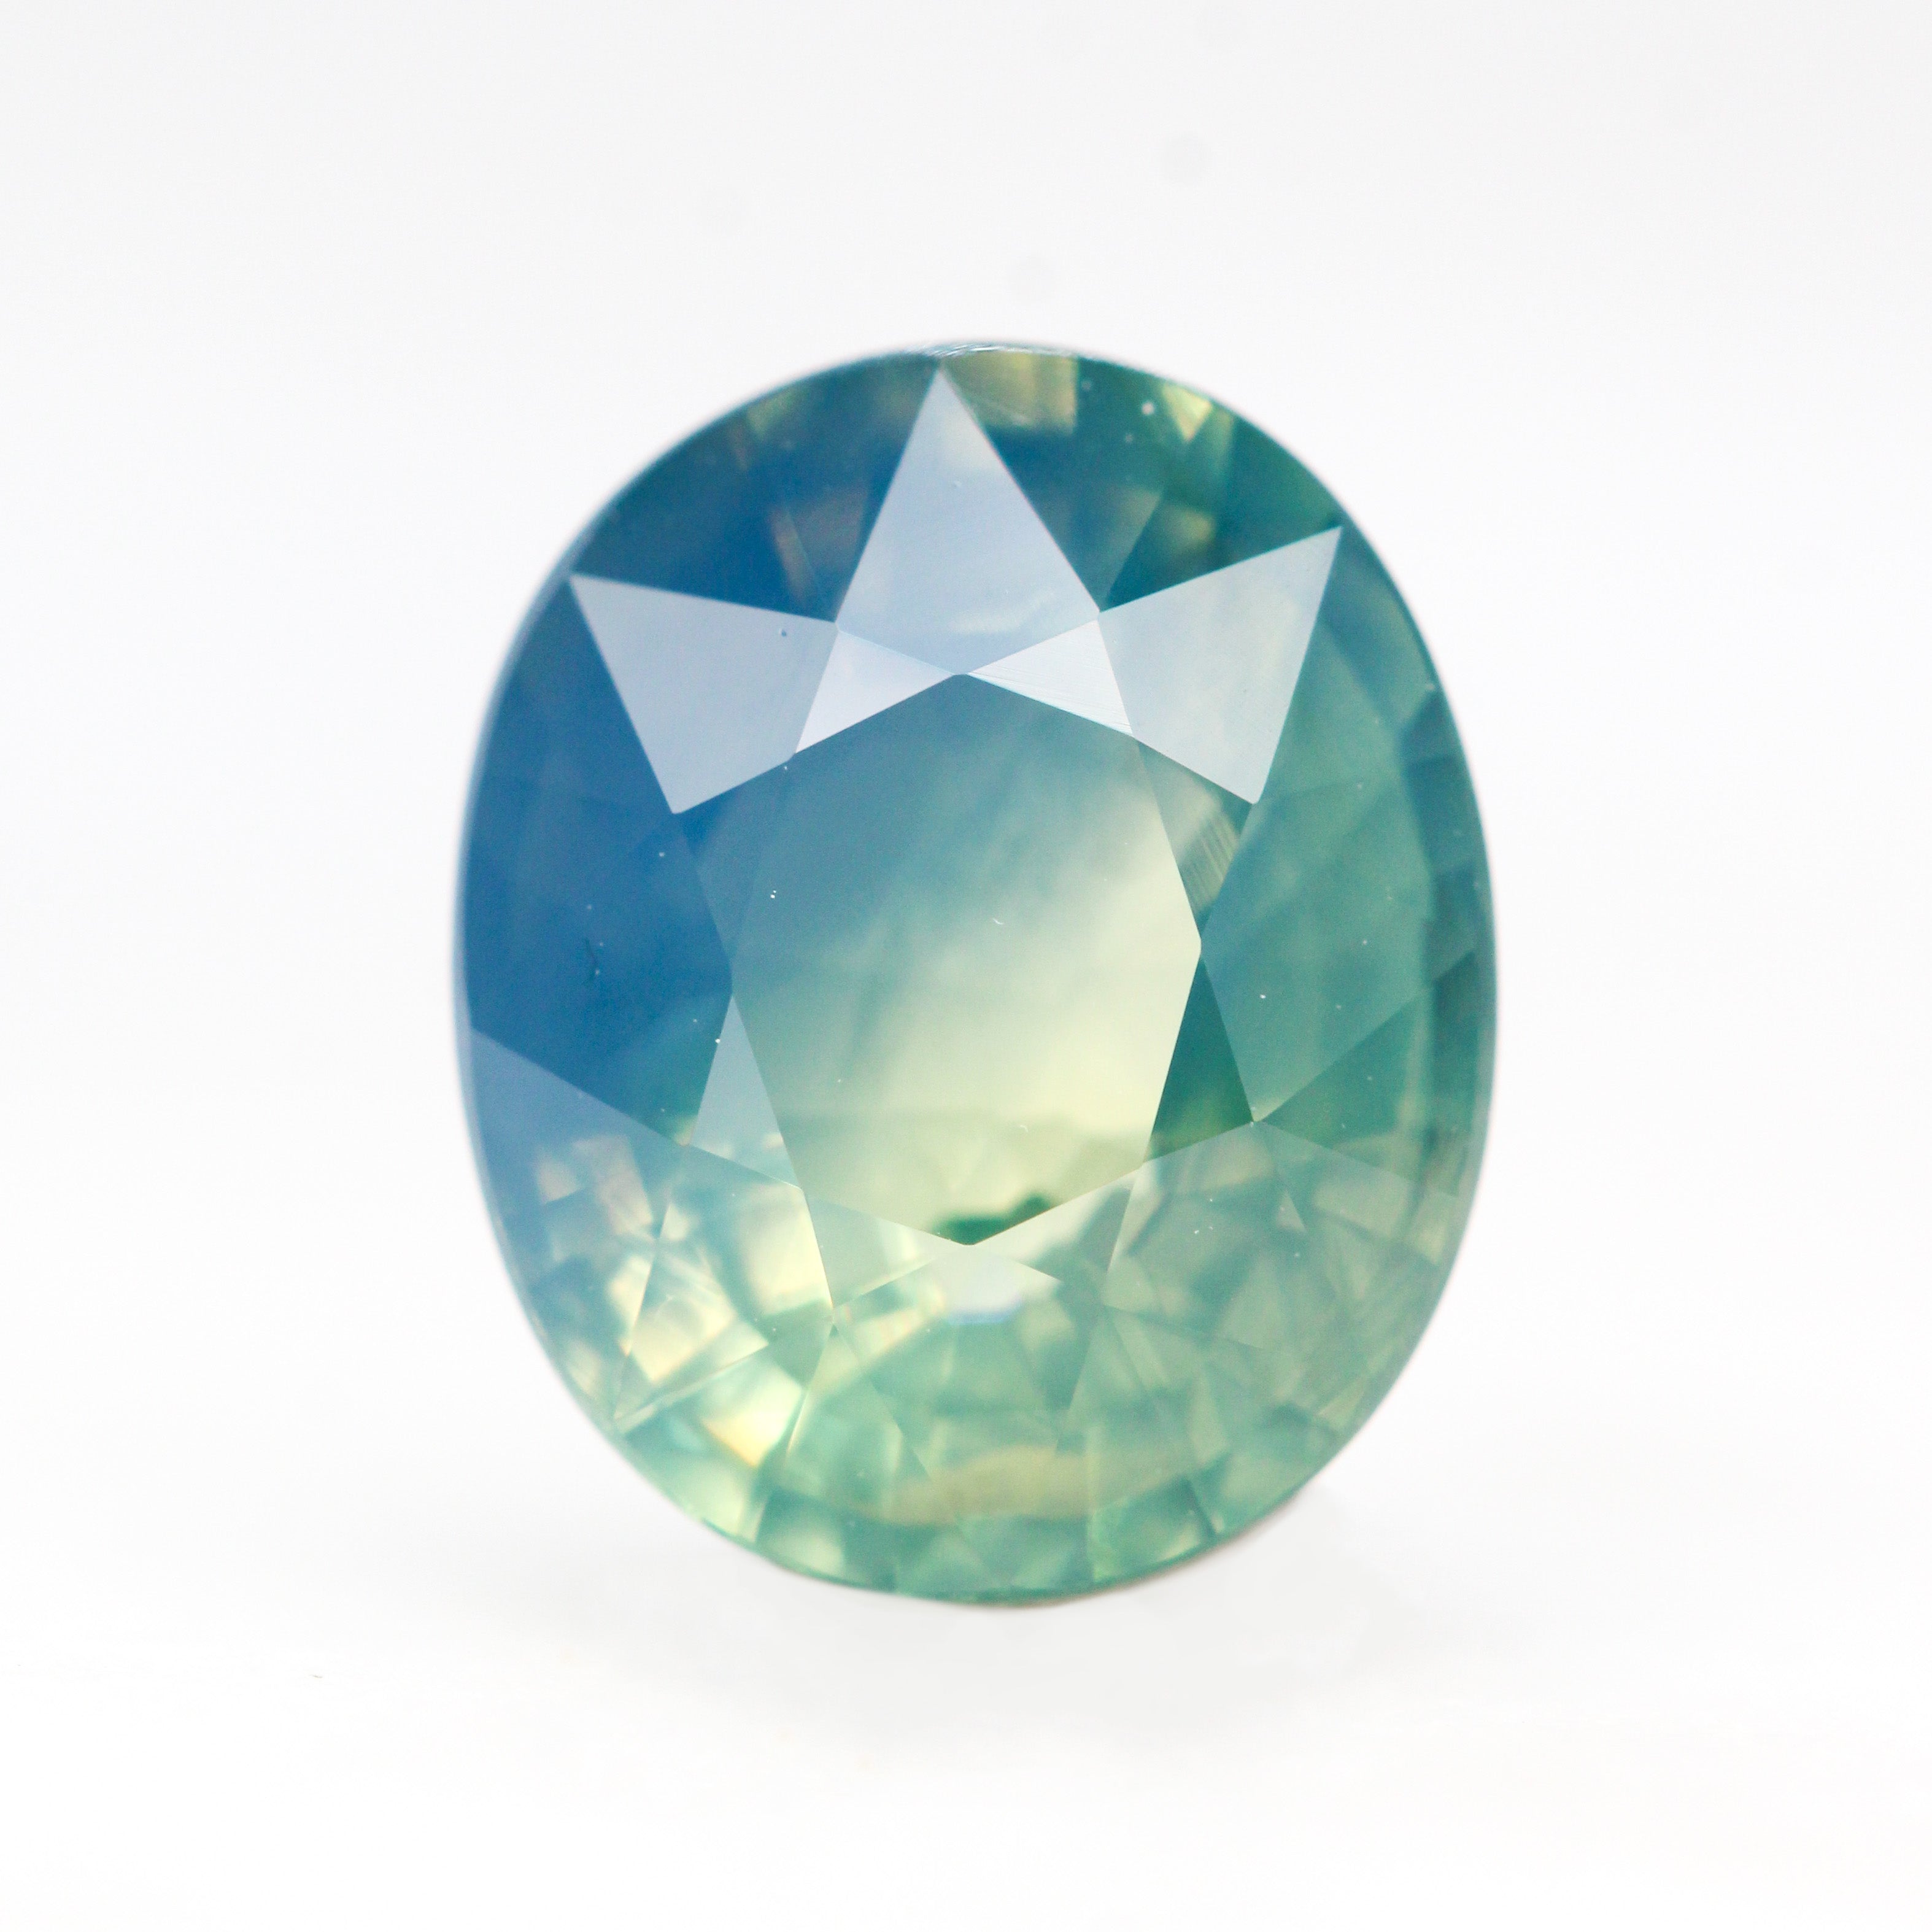 3.05 Carat Multicolor Green, Blue and Yellow Opalescent Oval Sapphire for  Custom Work - Inventory Code MCOS305